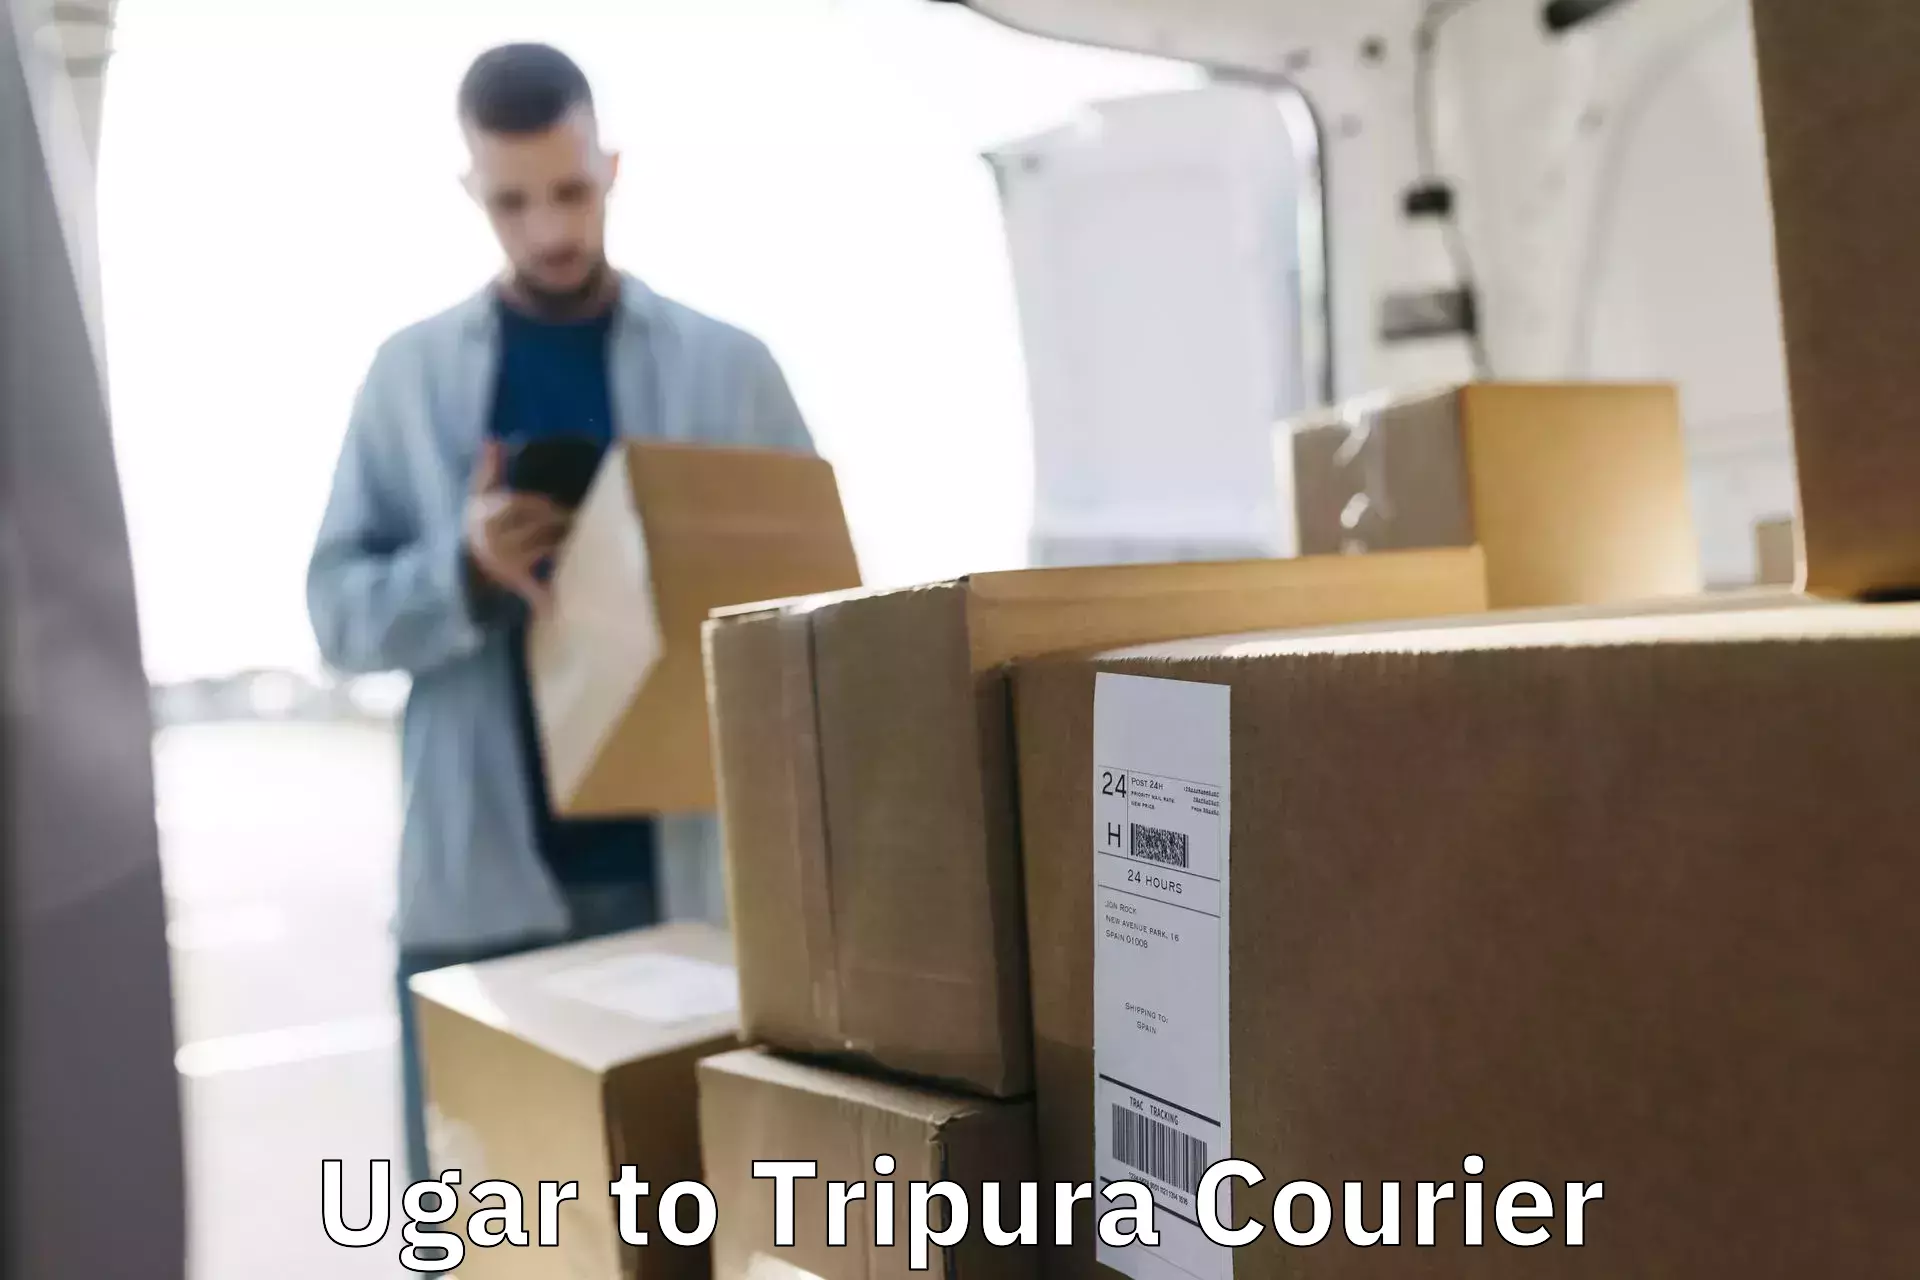 Express delivery capabilities Ugar to Tripura